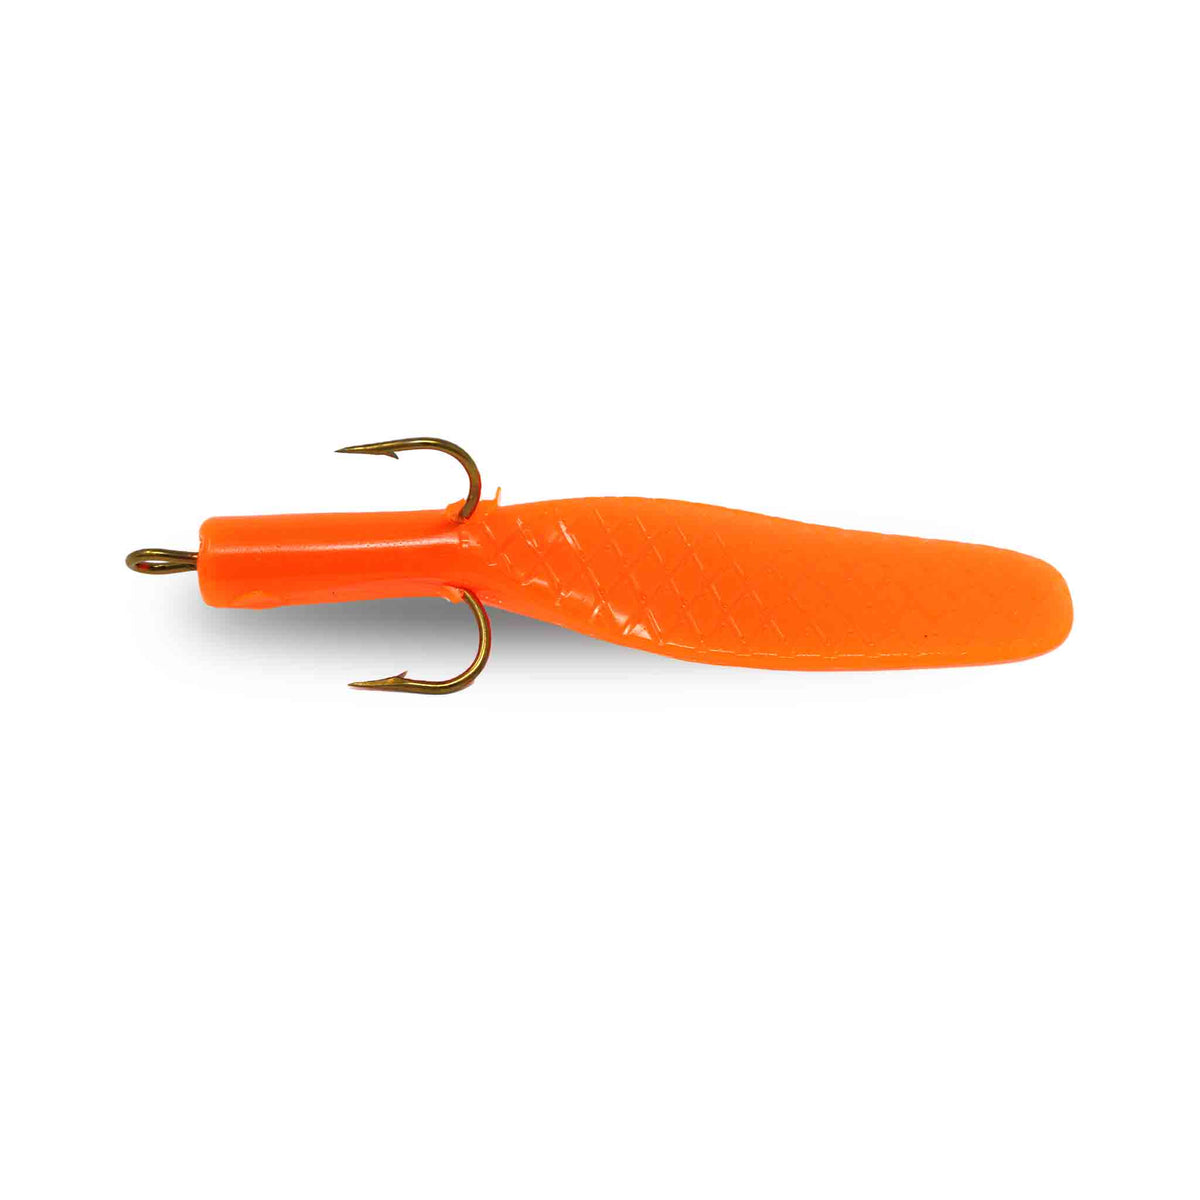 Beaver's Baits Baby Beaver XL Replacement Tail